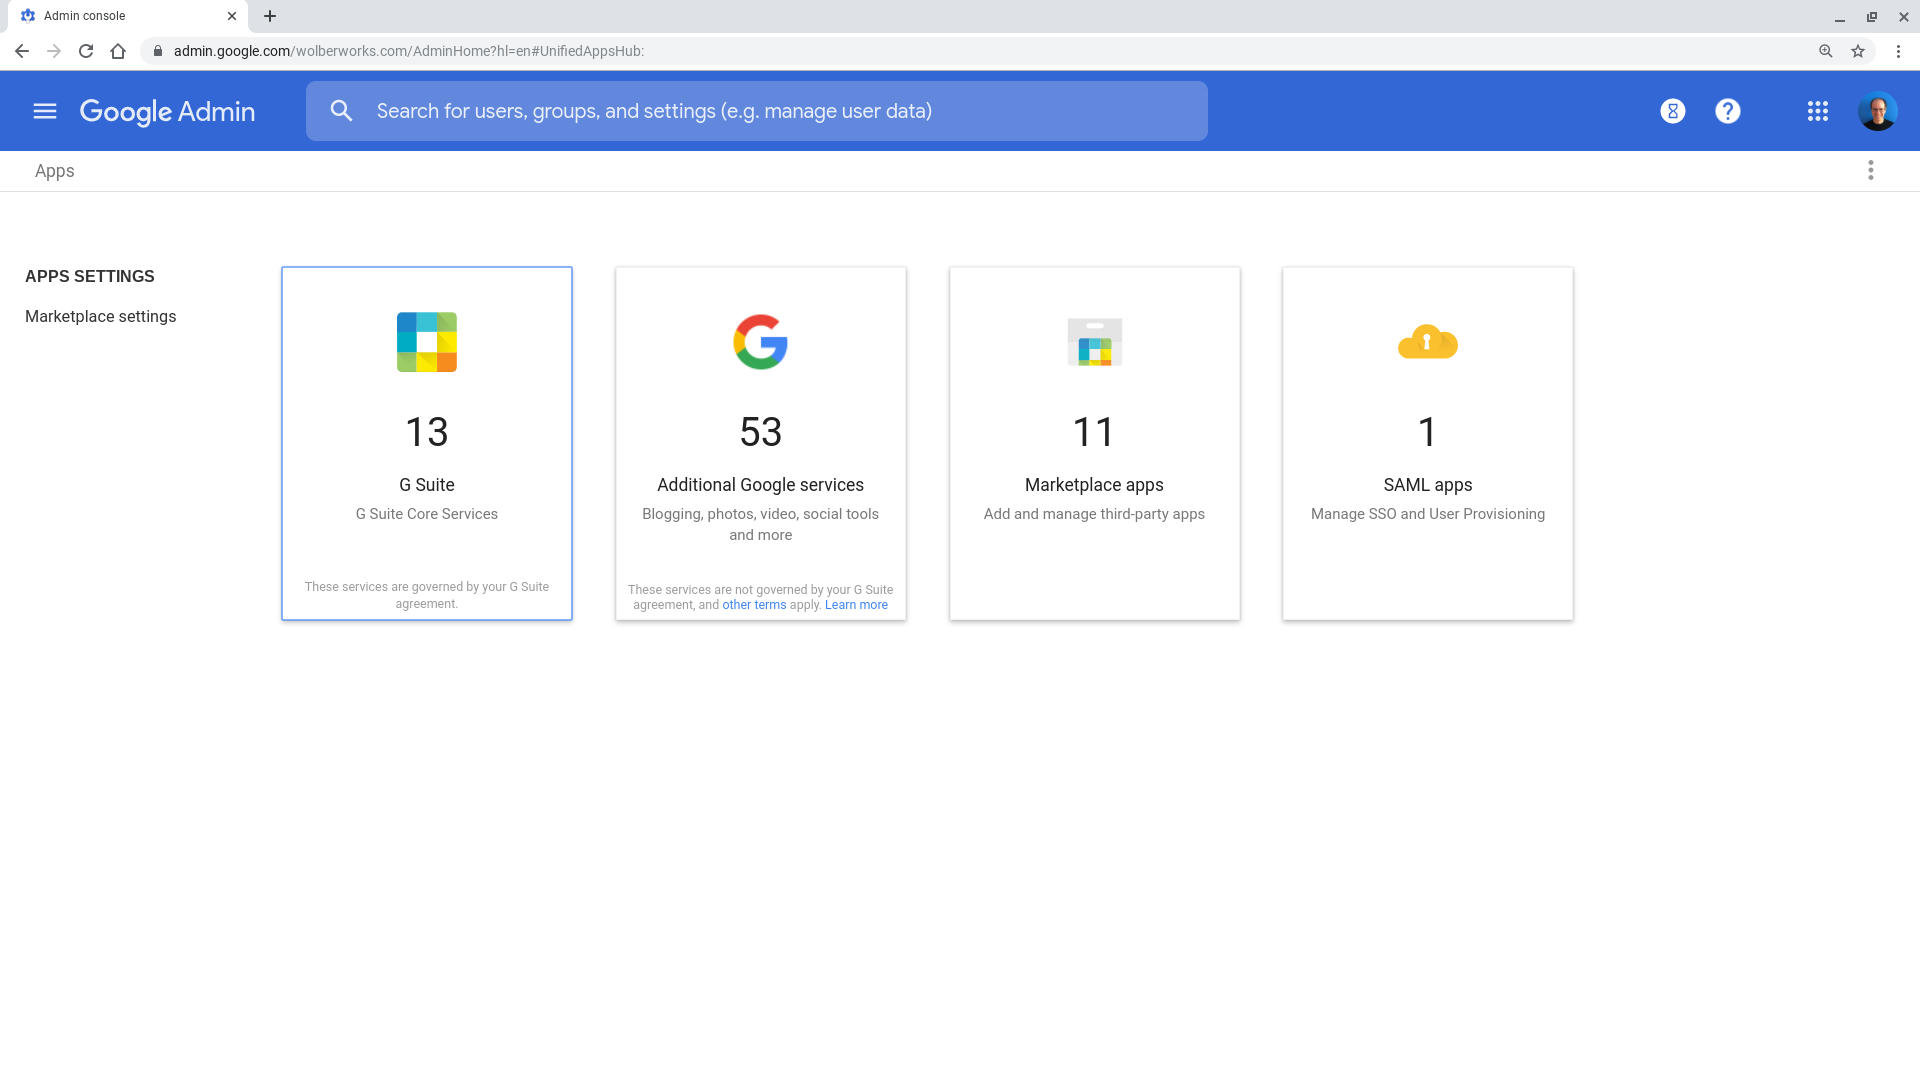 Screenshot of G Suite Admin console > App screen, showing G Suite apps, additional Google apps, Marketplace apps, and SAML connected apps.